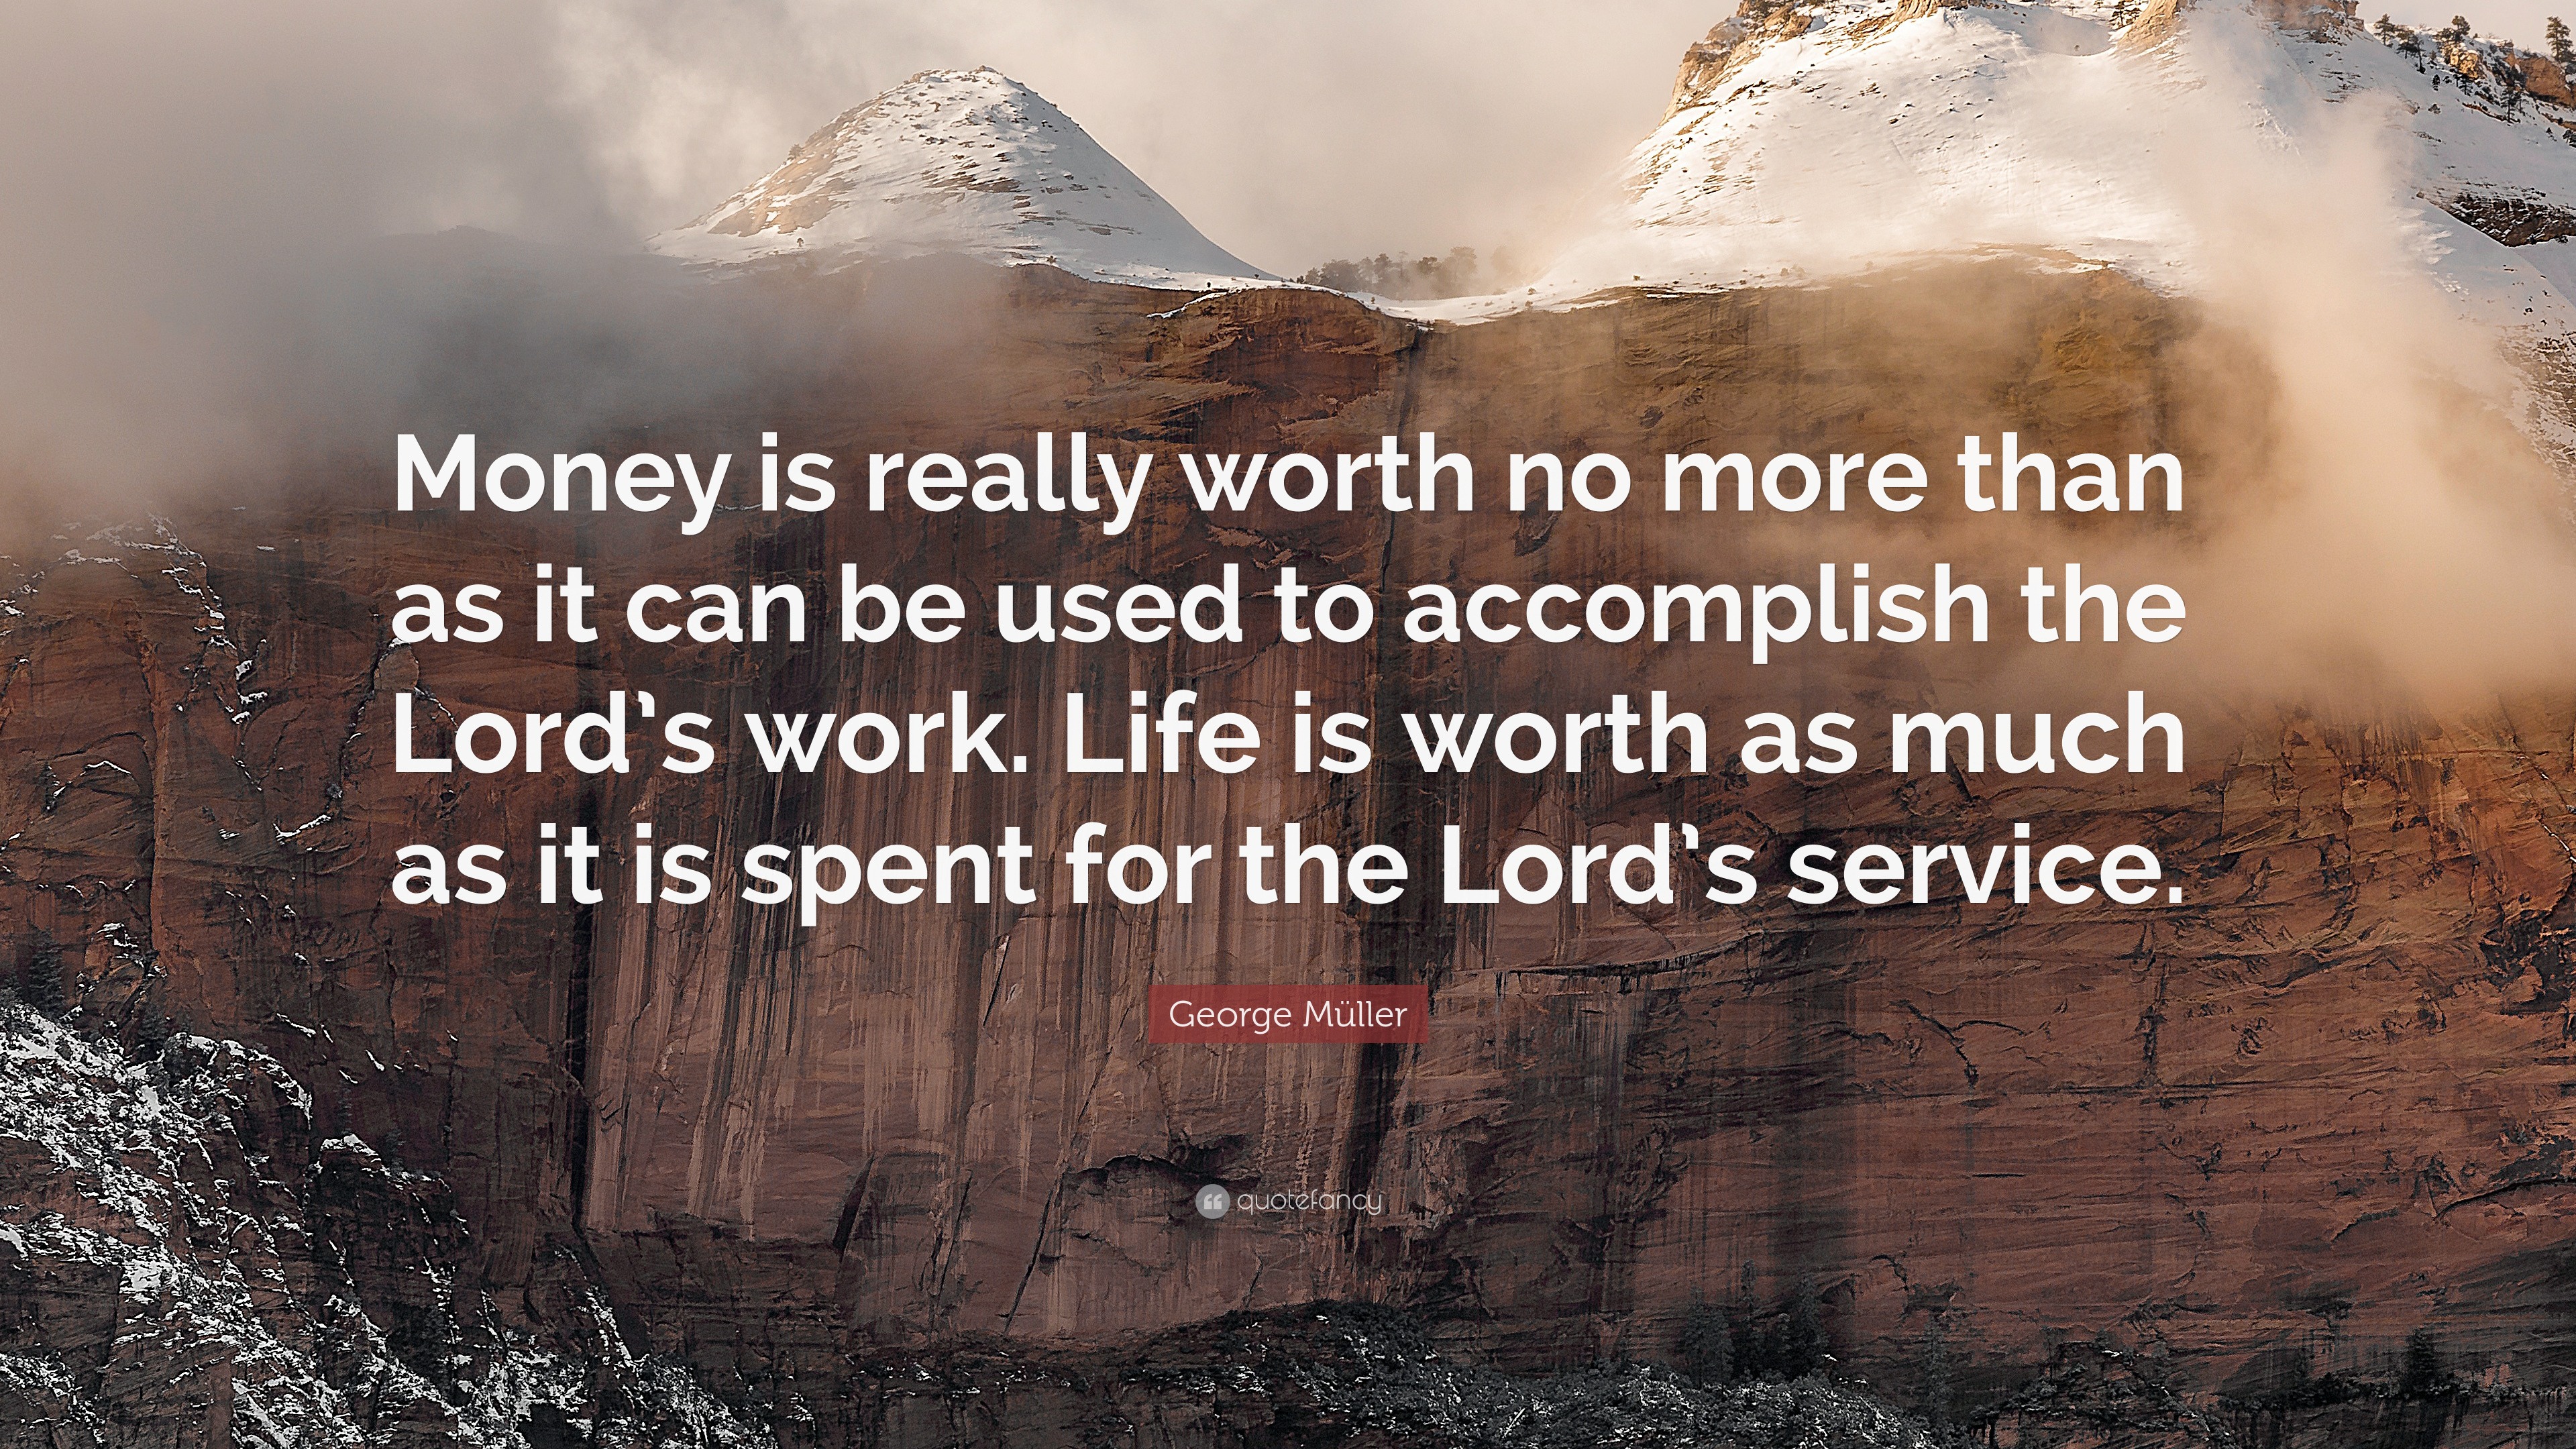 George Muller Quote Money Is Really Worth No More Than As It Can Be Used To Accomplish The Lord S Work Life Is Worth As Much As It Is Spent